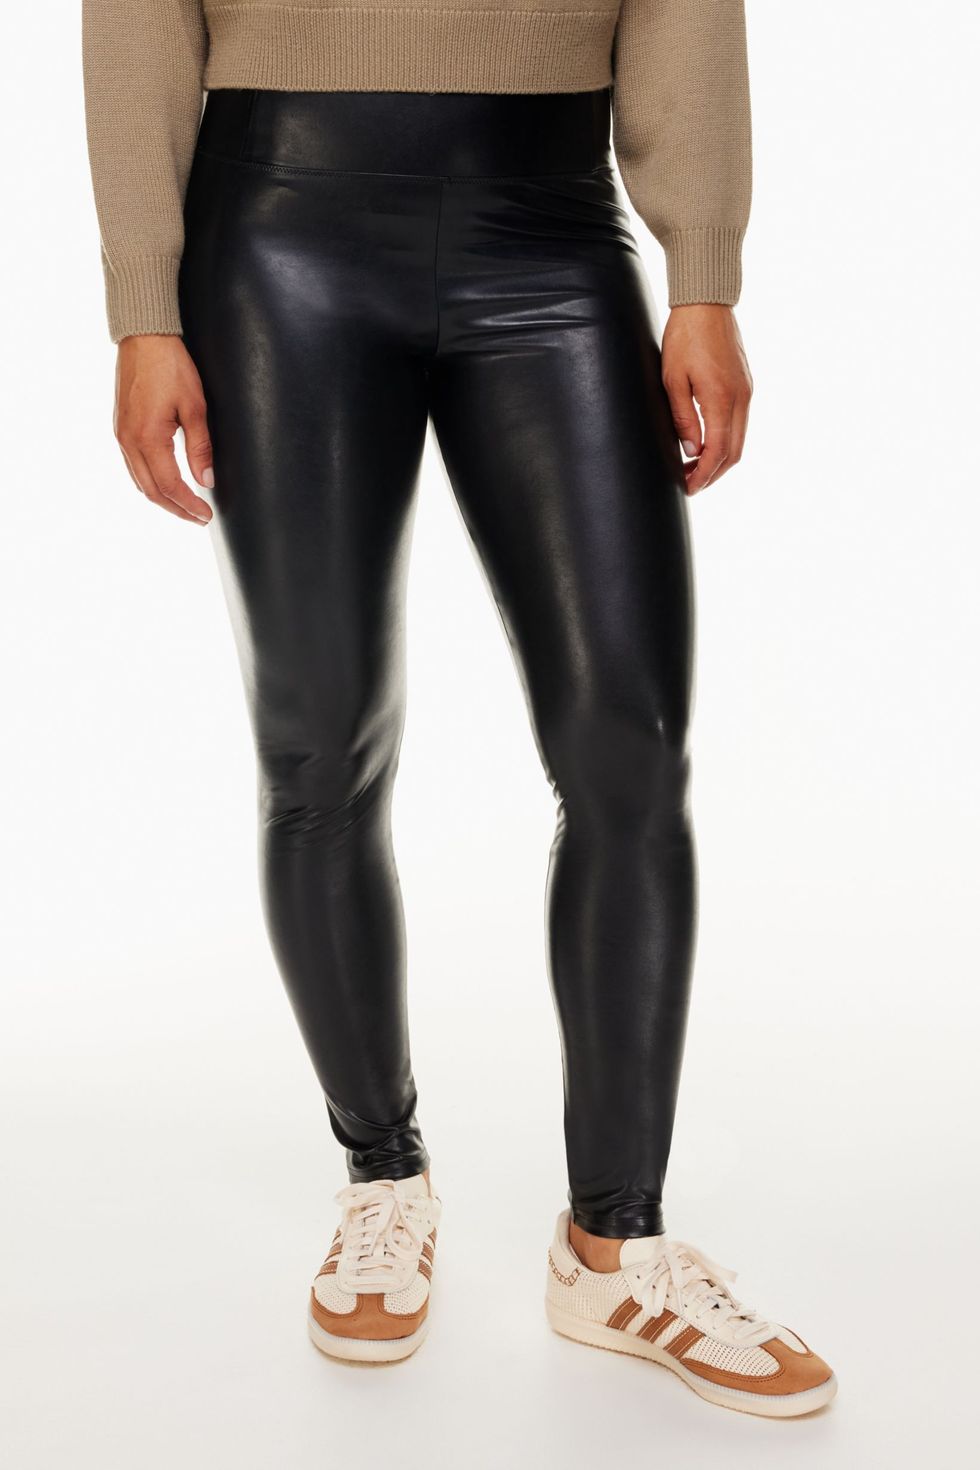 Black Wet Look Silk Like Shiny with The Silver Side Zip - Leggings